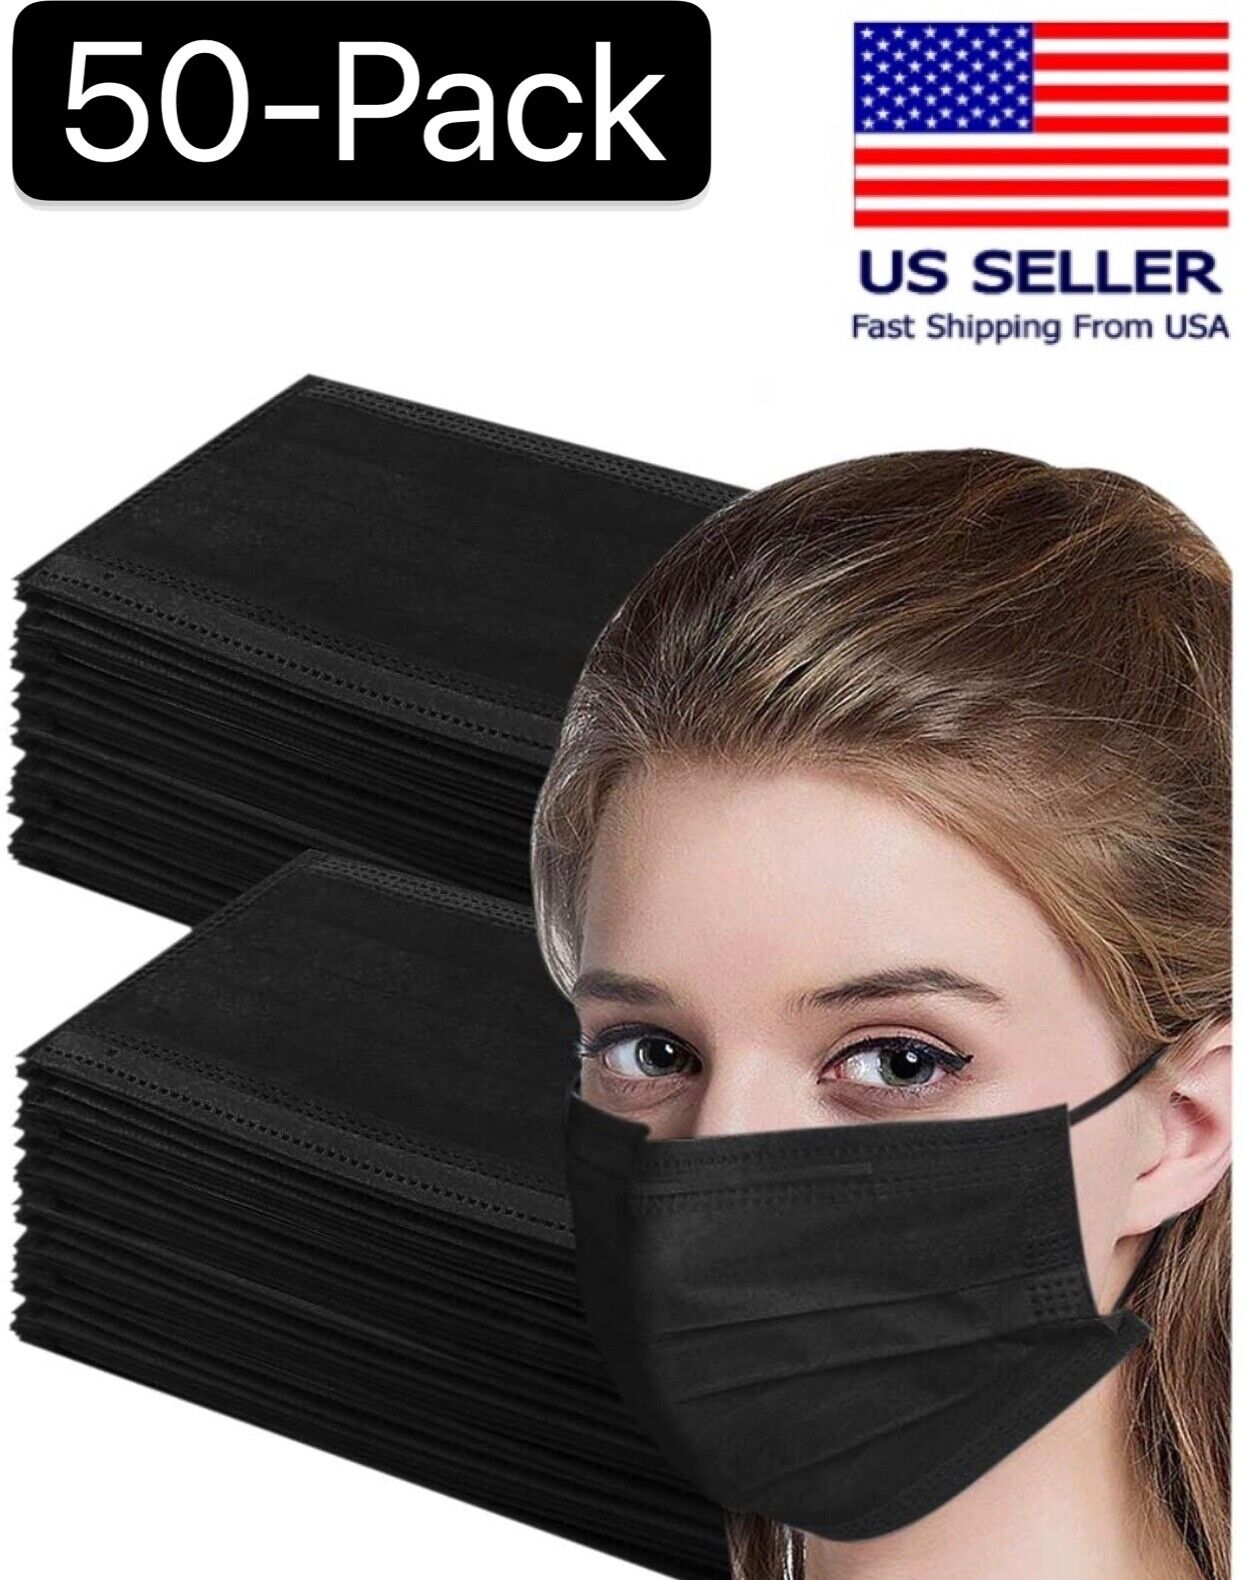 50 Pcs Black 3-Ply Face Mask Disposable Non Medical Surgical Earloop Mouth Cover Unbranded Does Not Apply